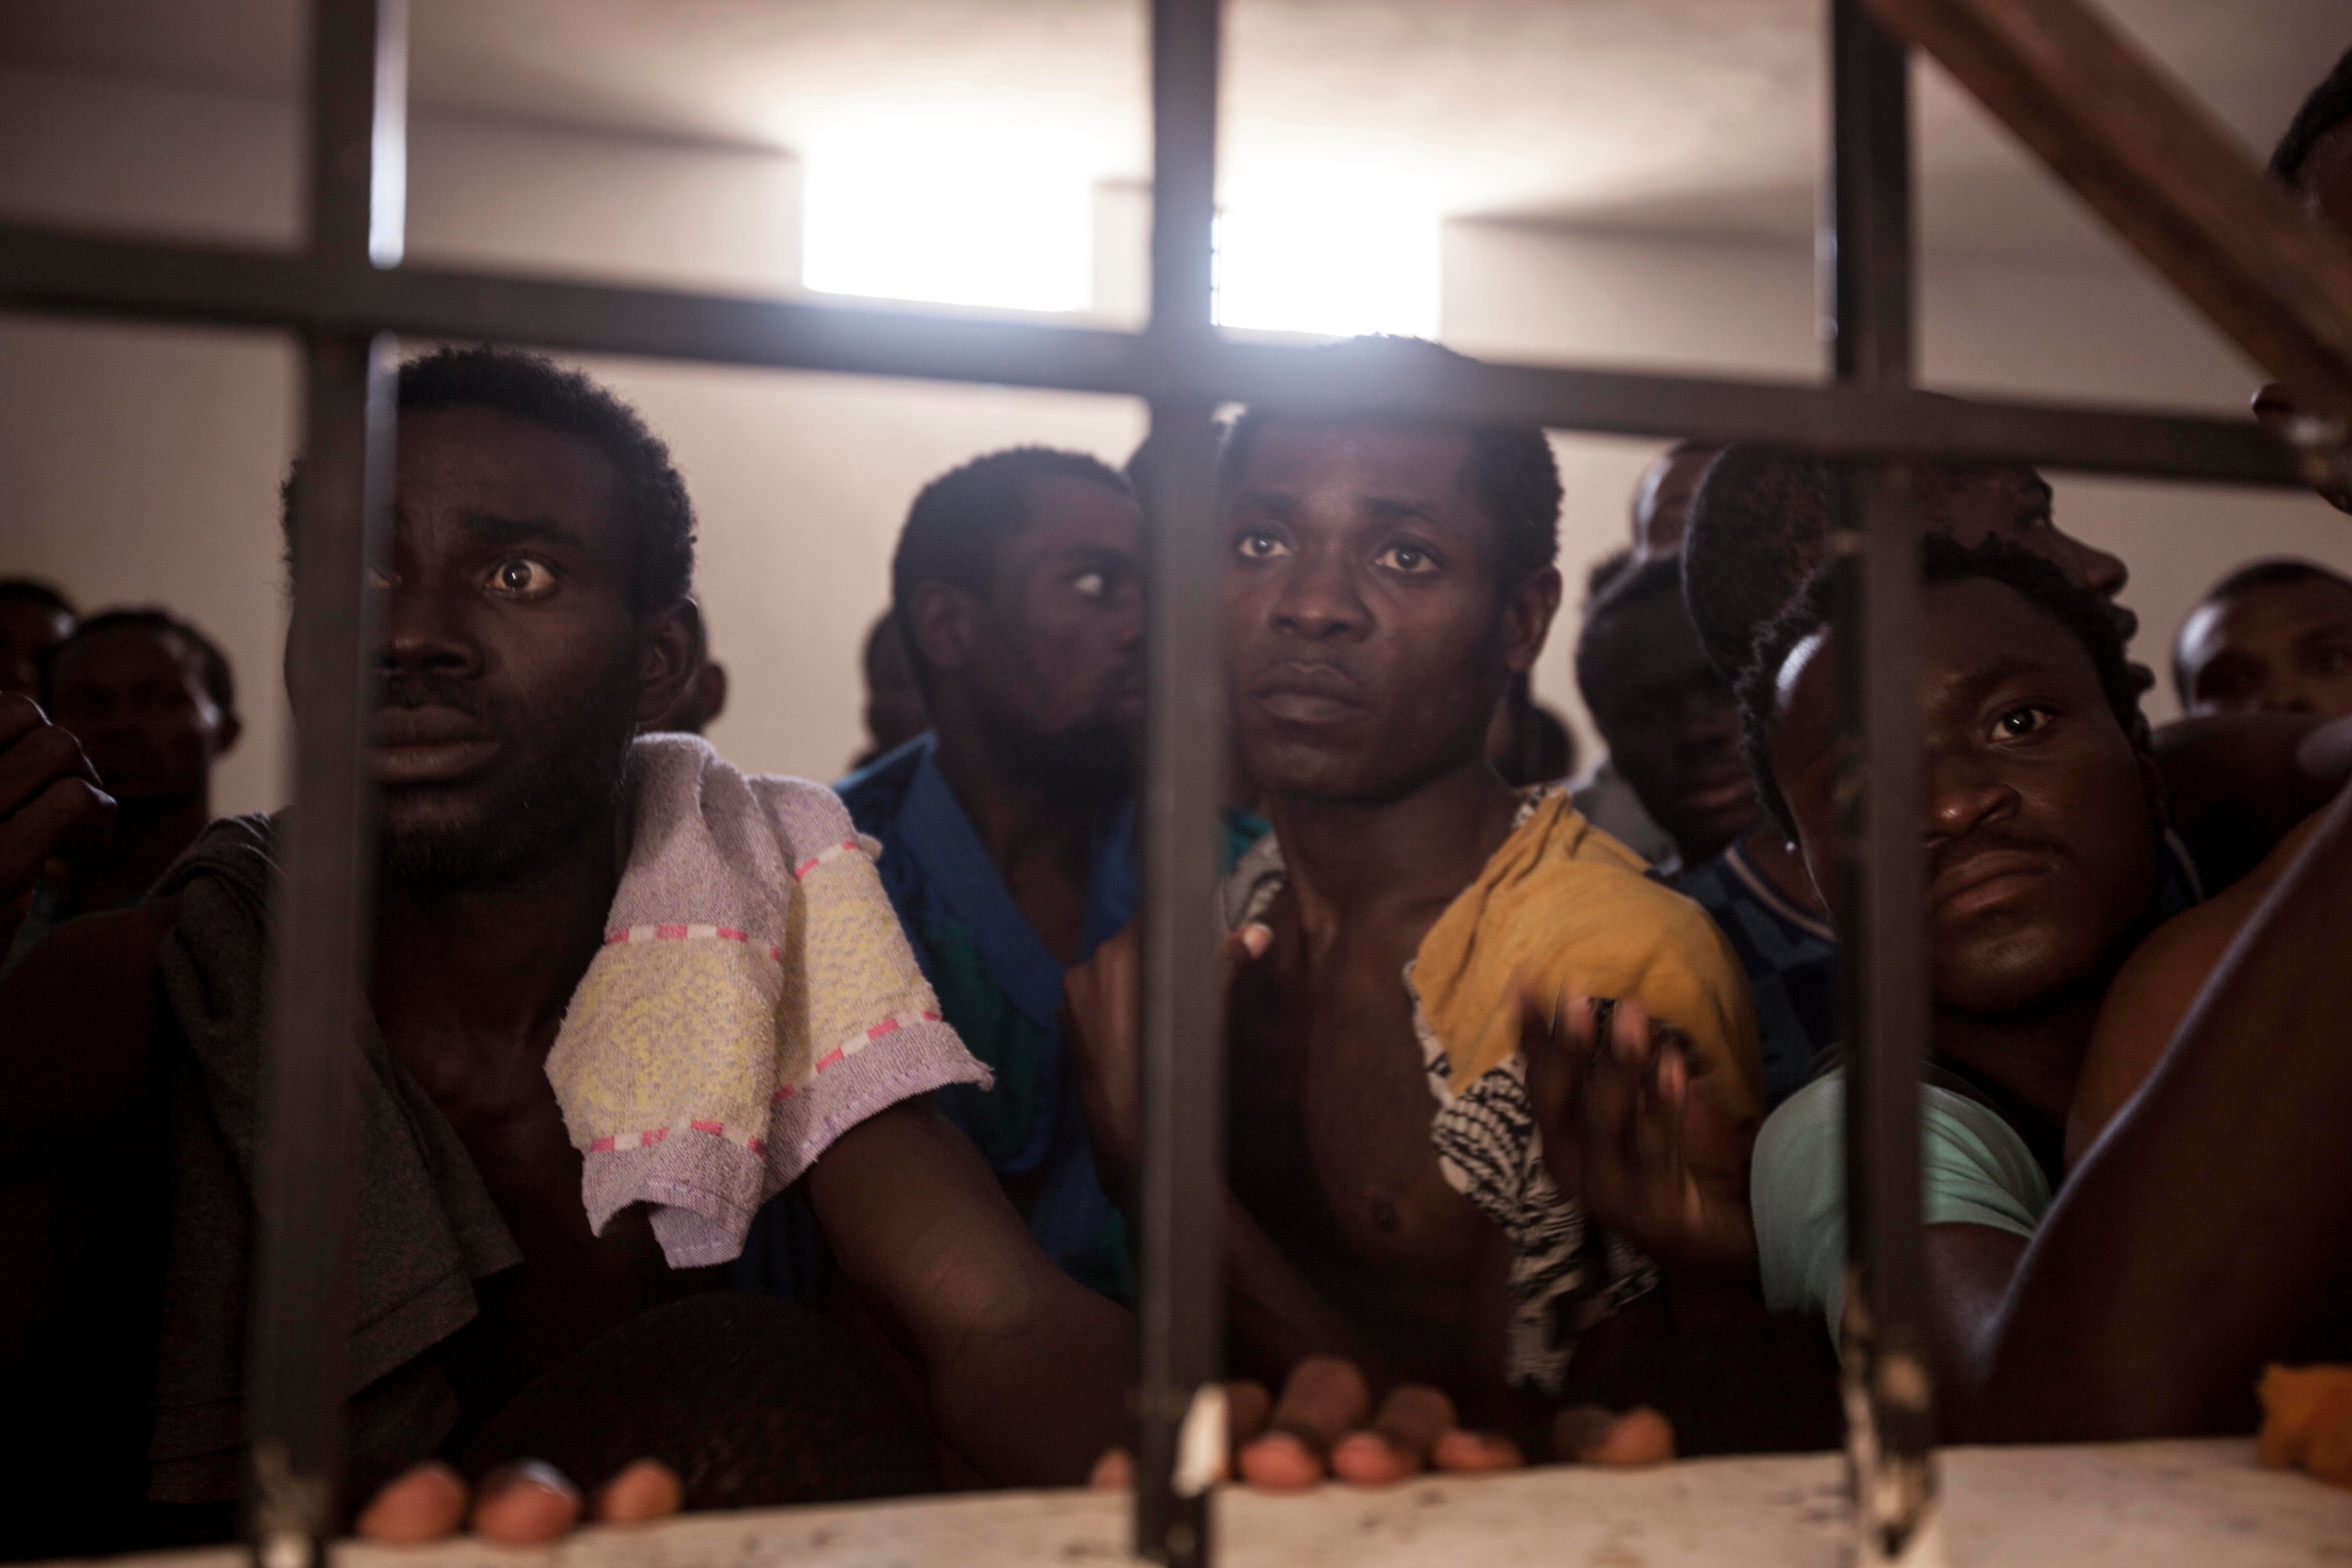 Sub-Saharan migrants and refugees begging for their release in a detention center in Surman, Libya. (Narciso Contreras for Fondation Carmignac)